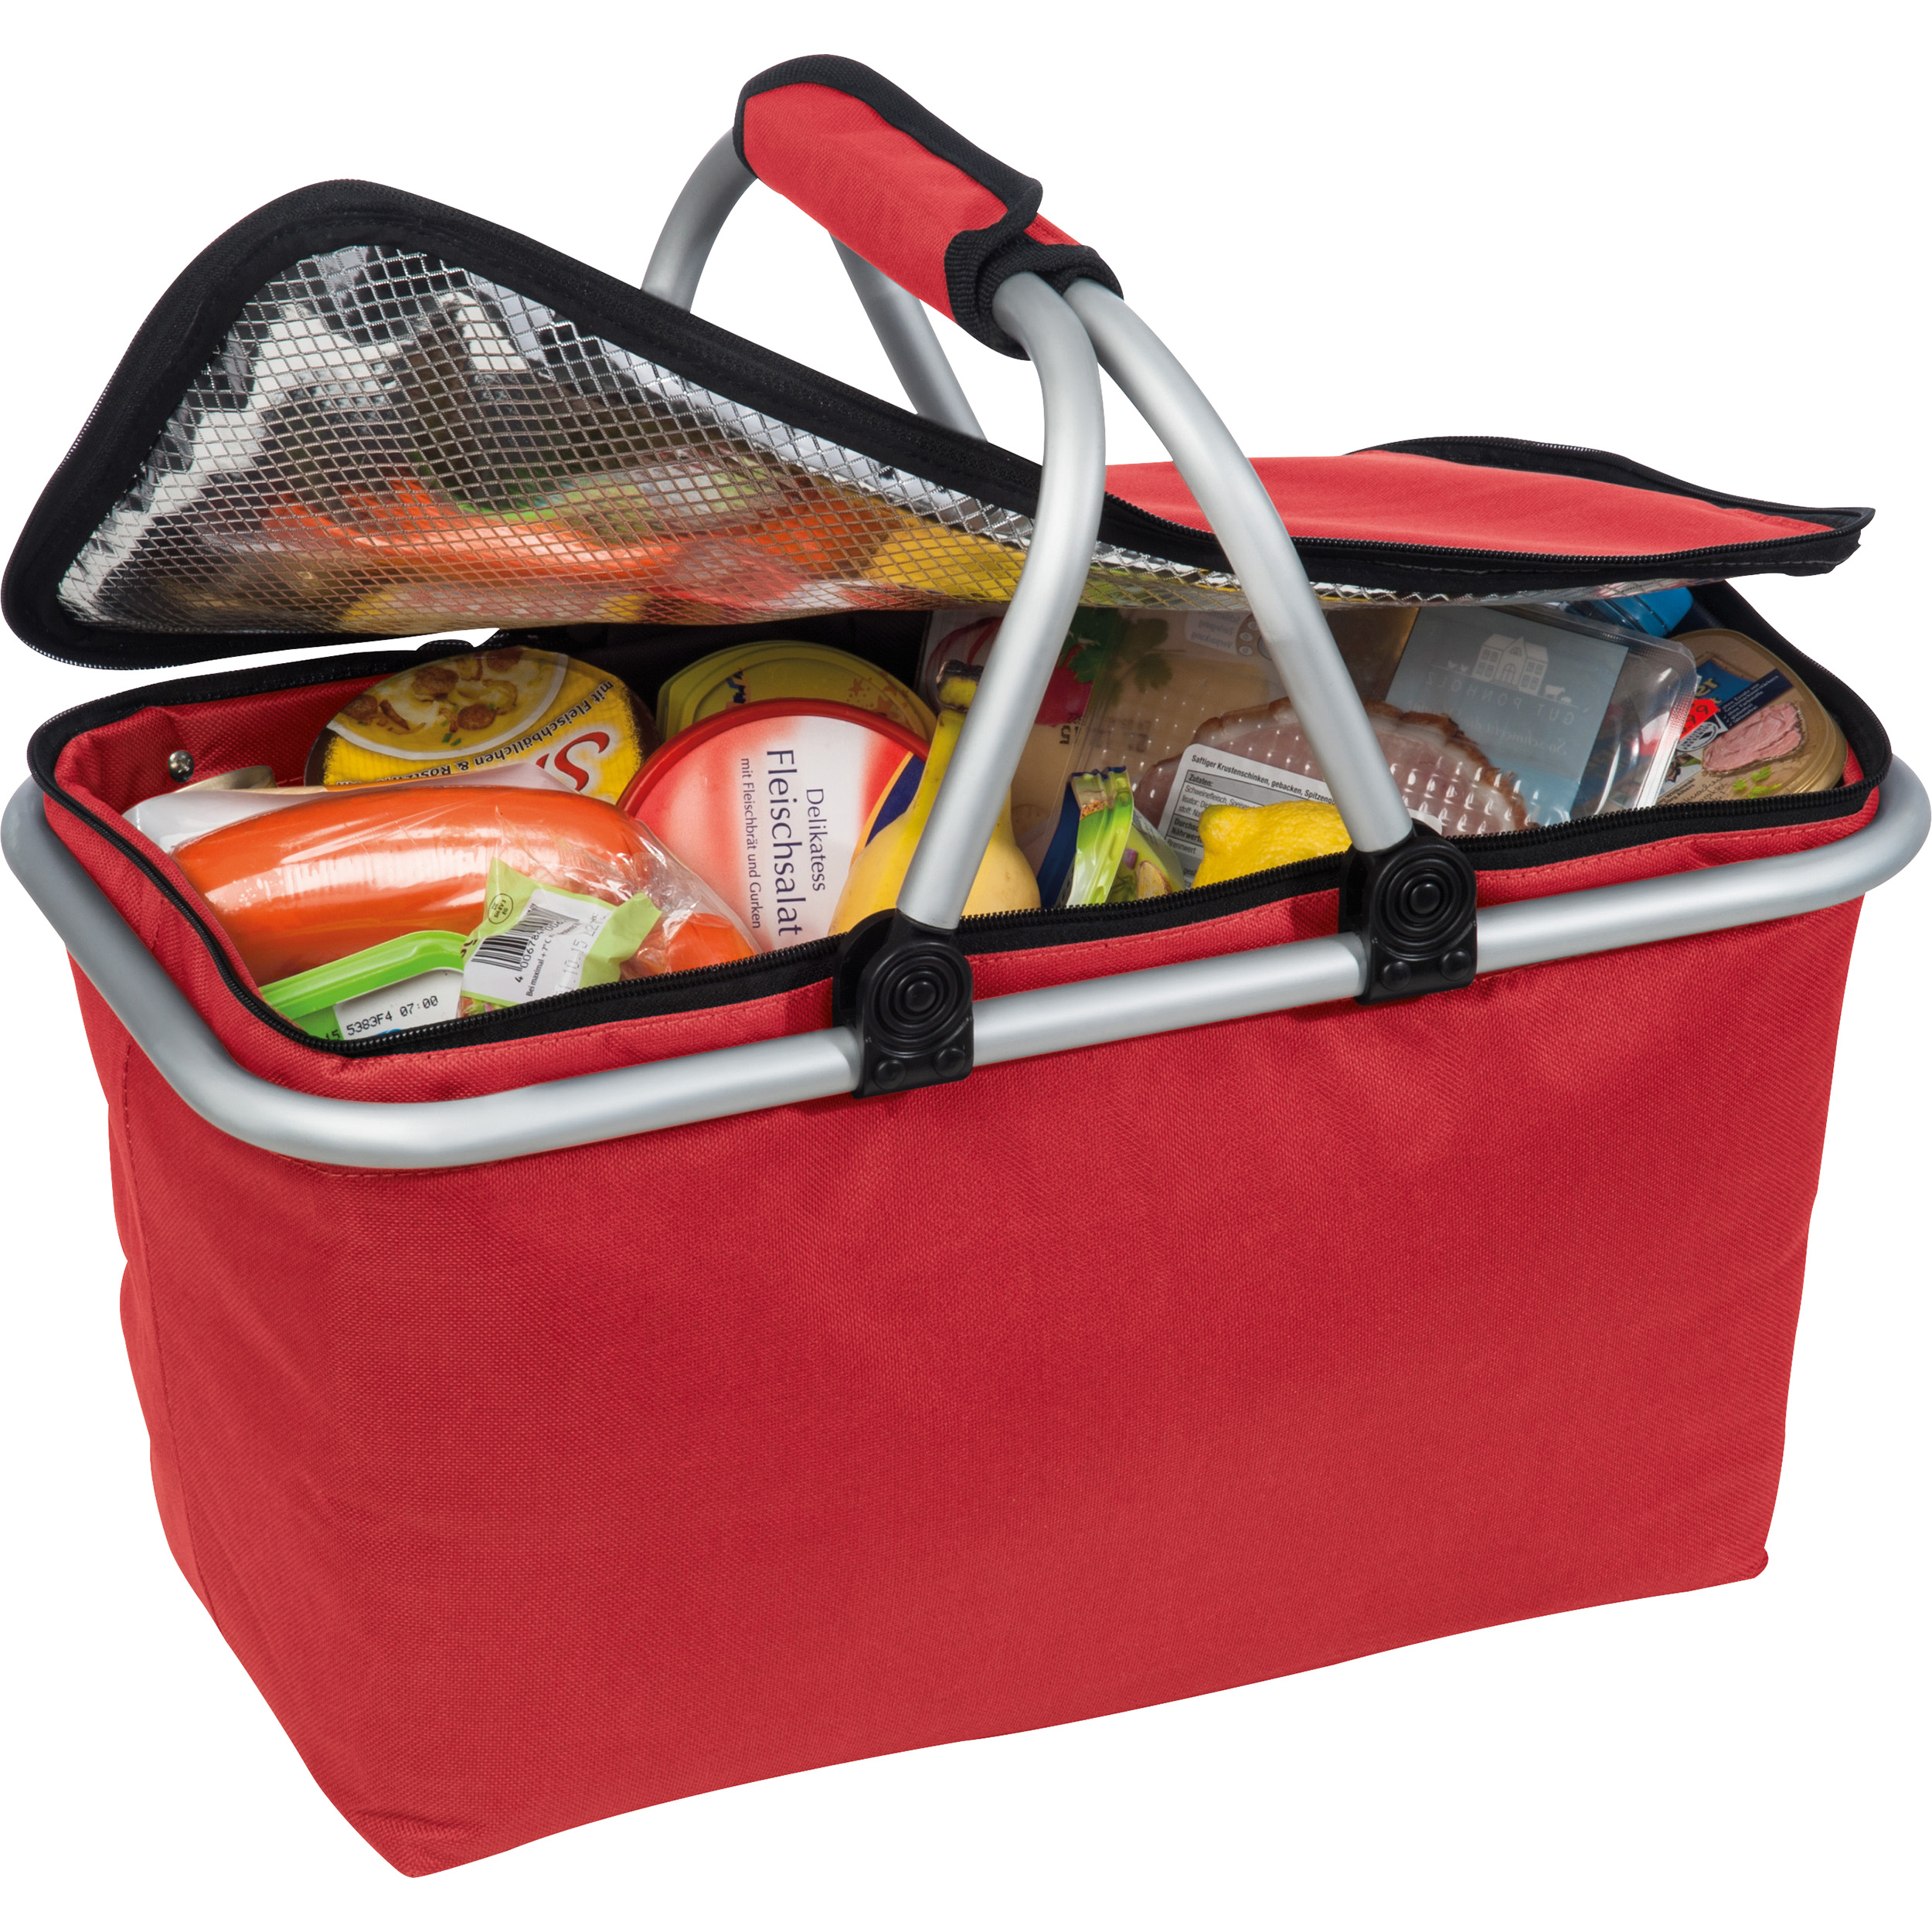 Bledlow Foldable Insulated Shopping Basket - Sandwich